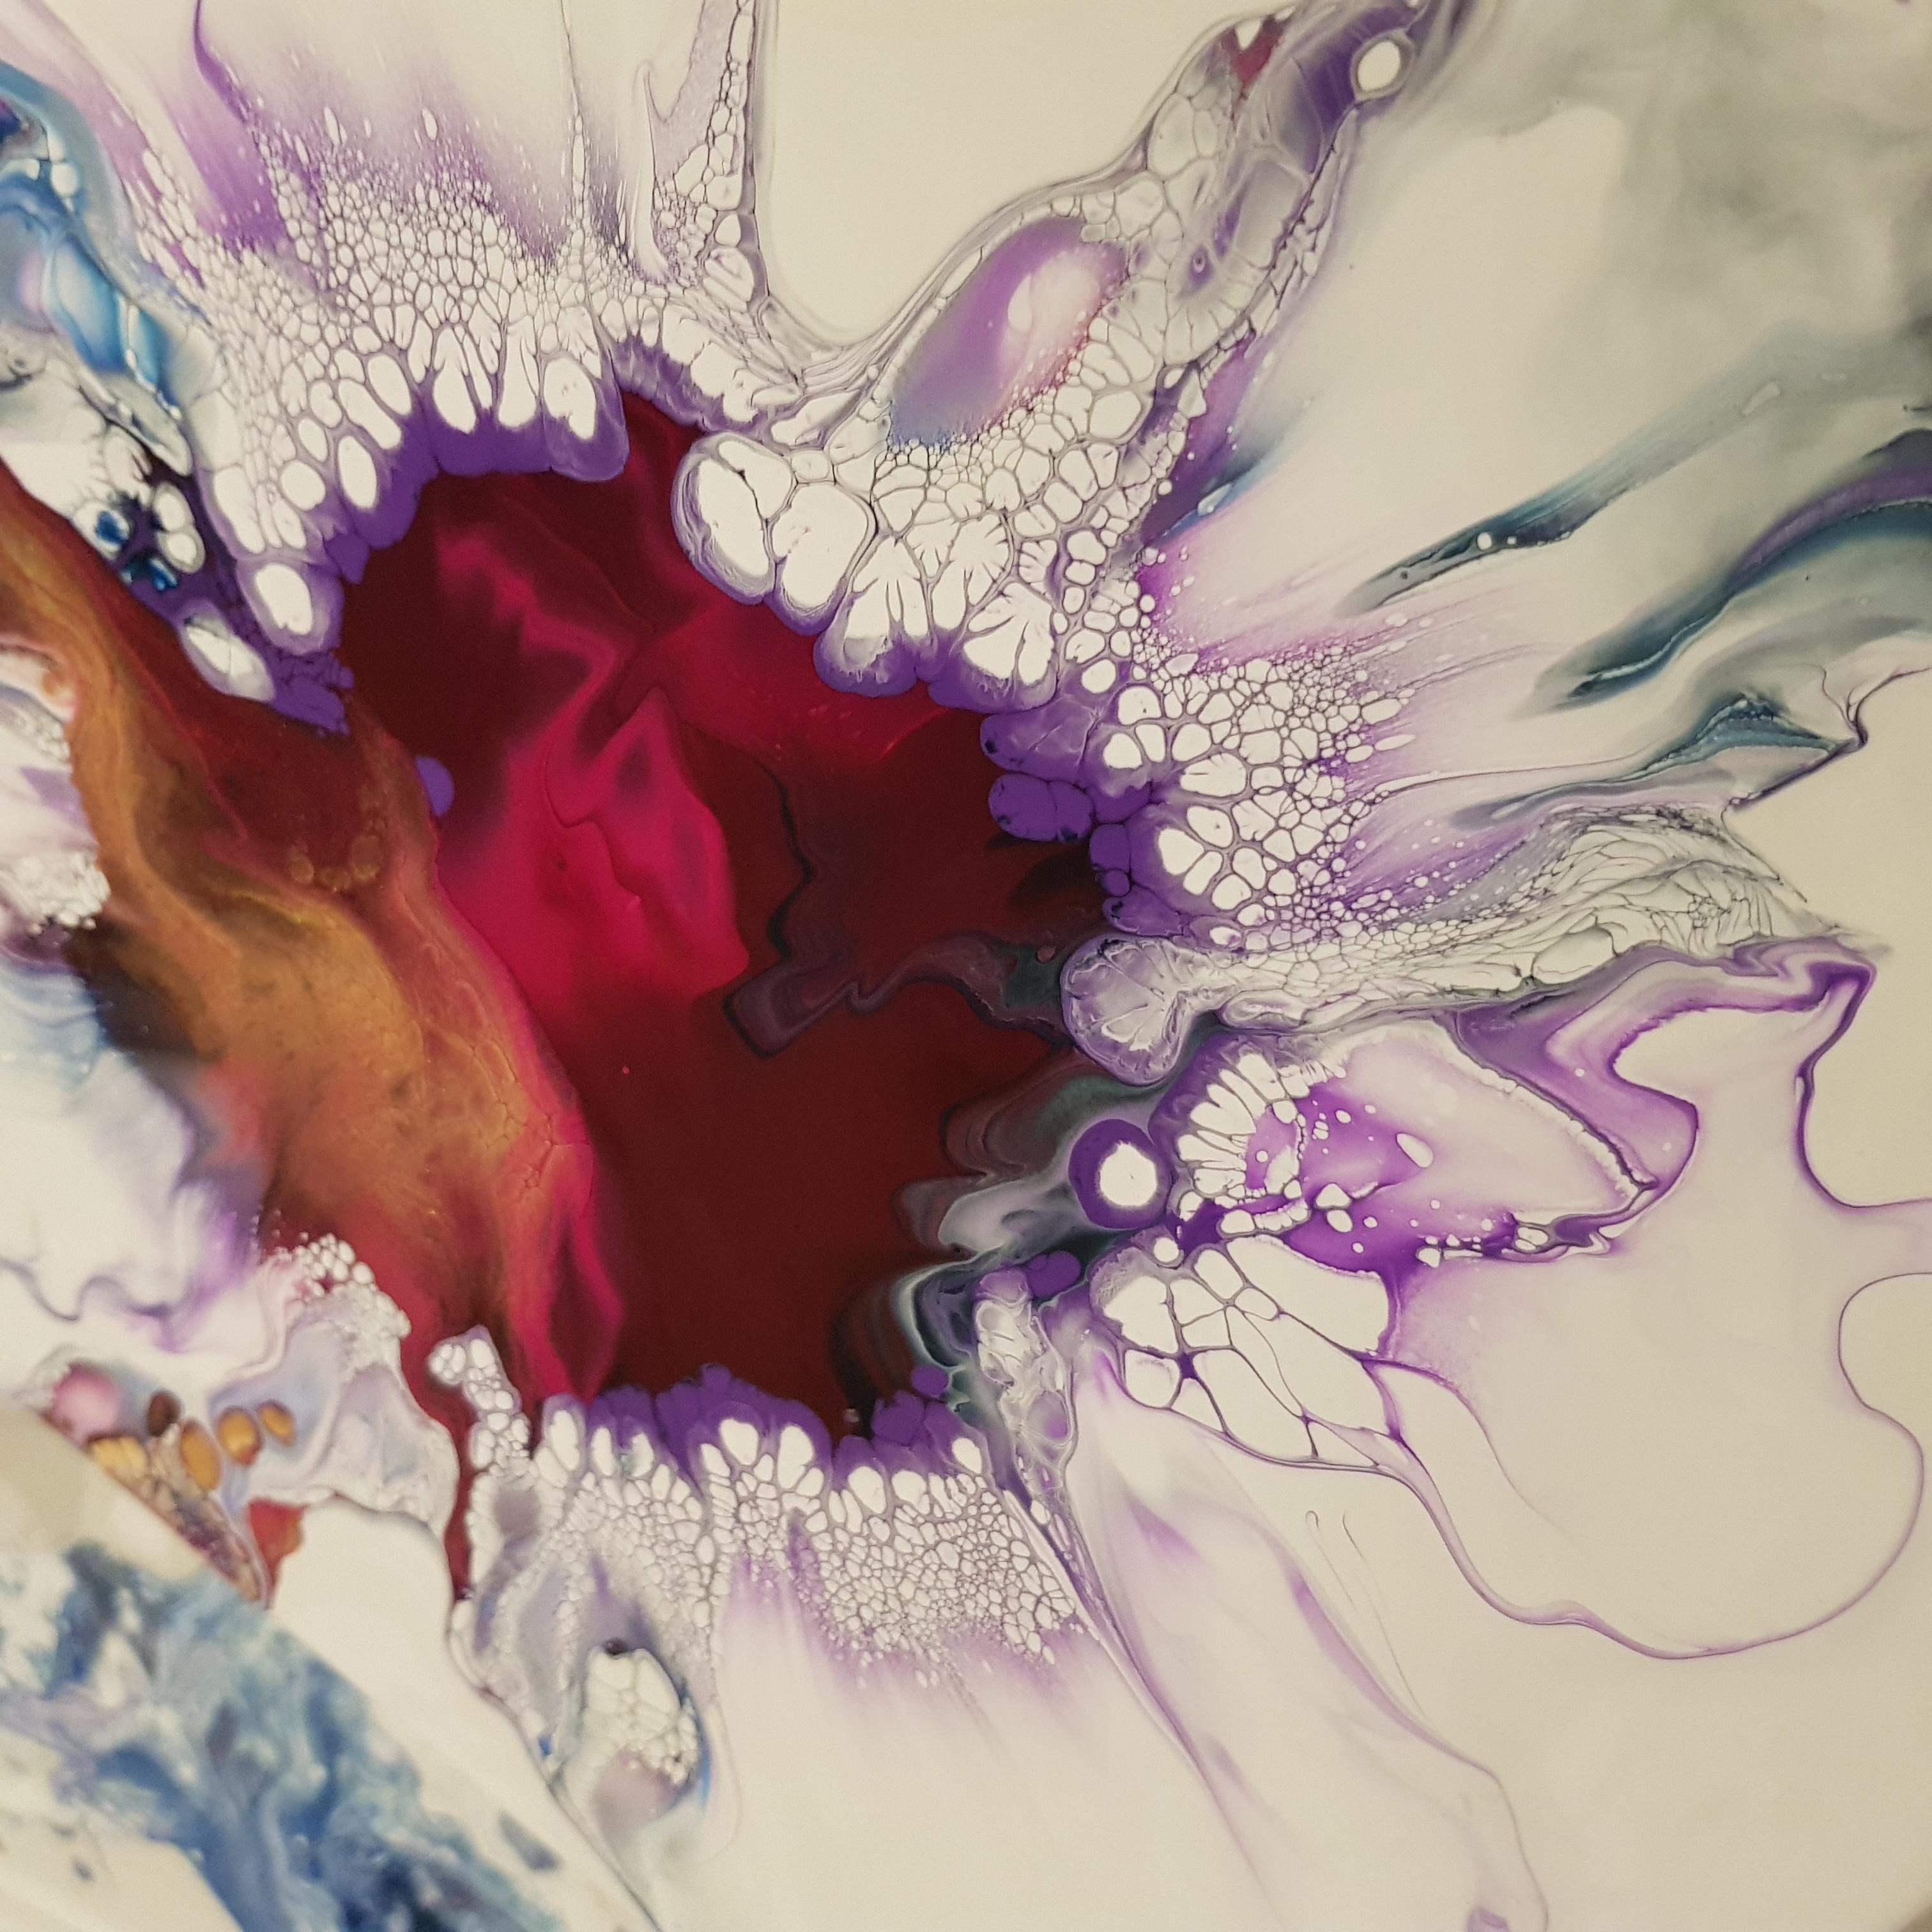 Friday Fluid Art Experience - A 'Paint and Sip' fun and creative event